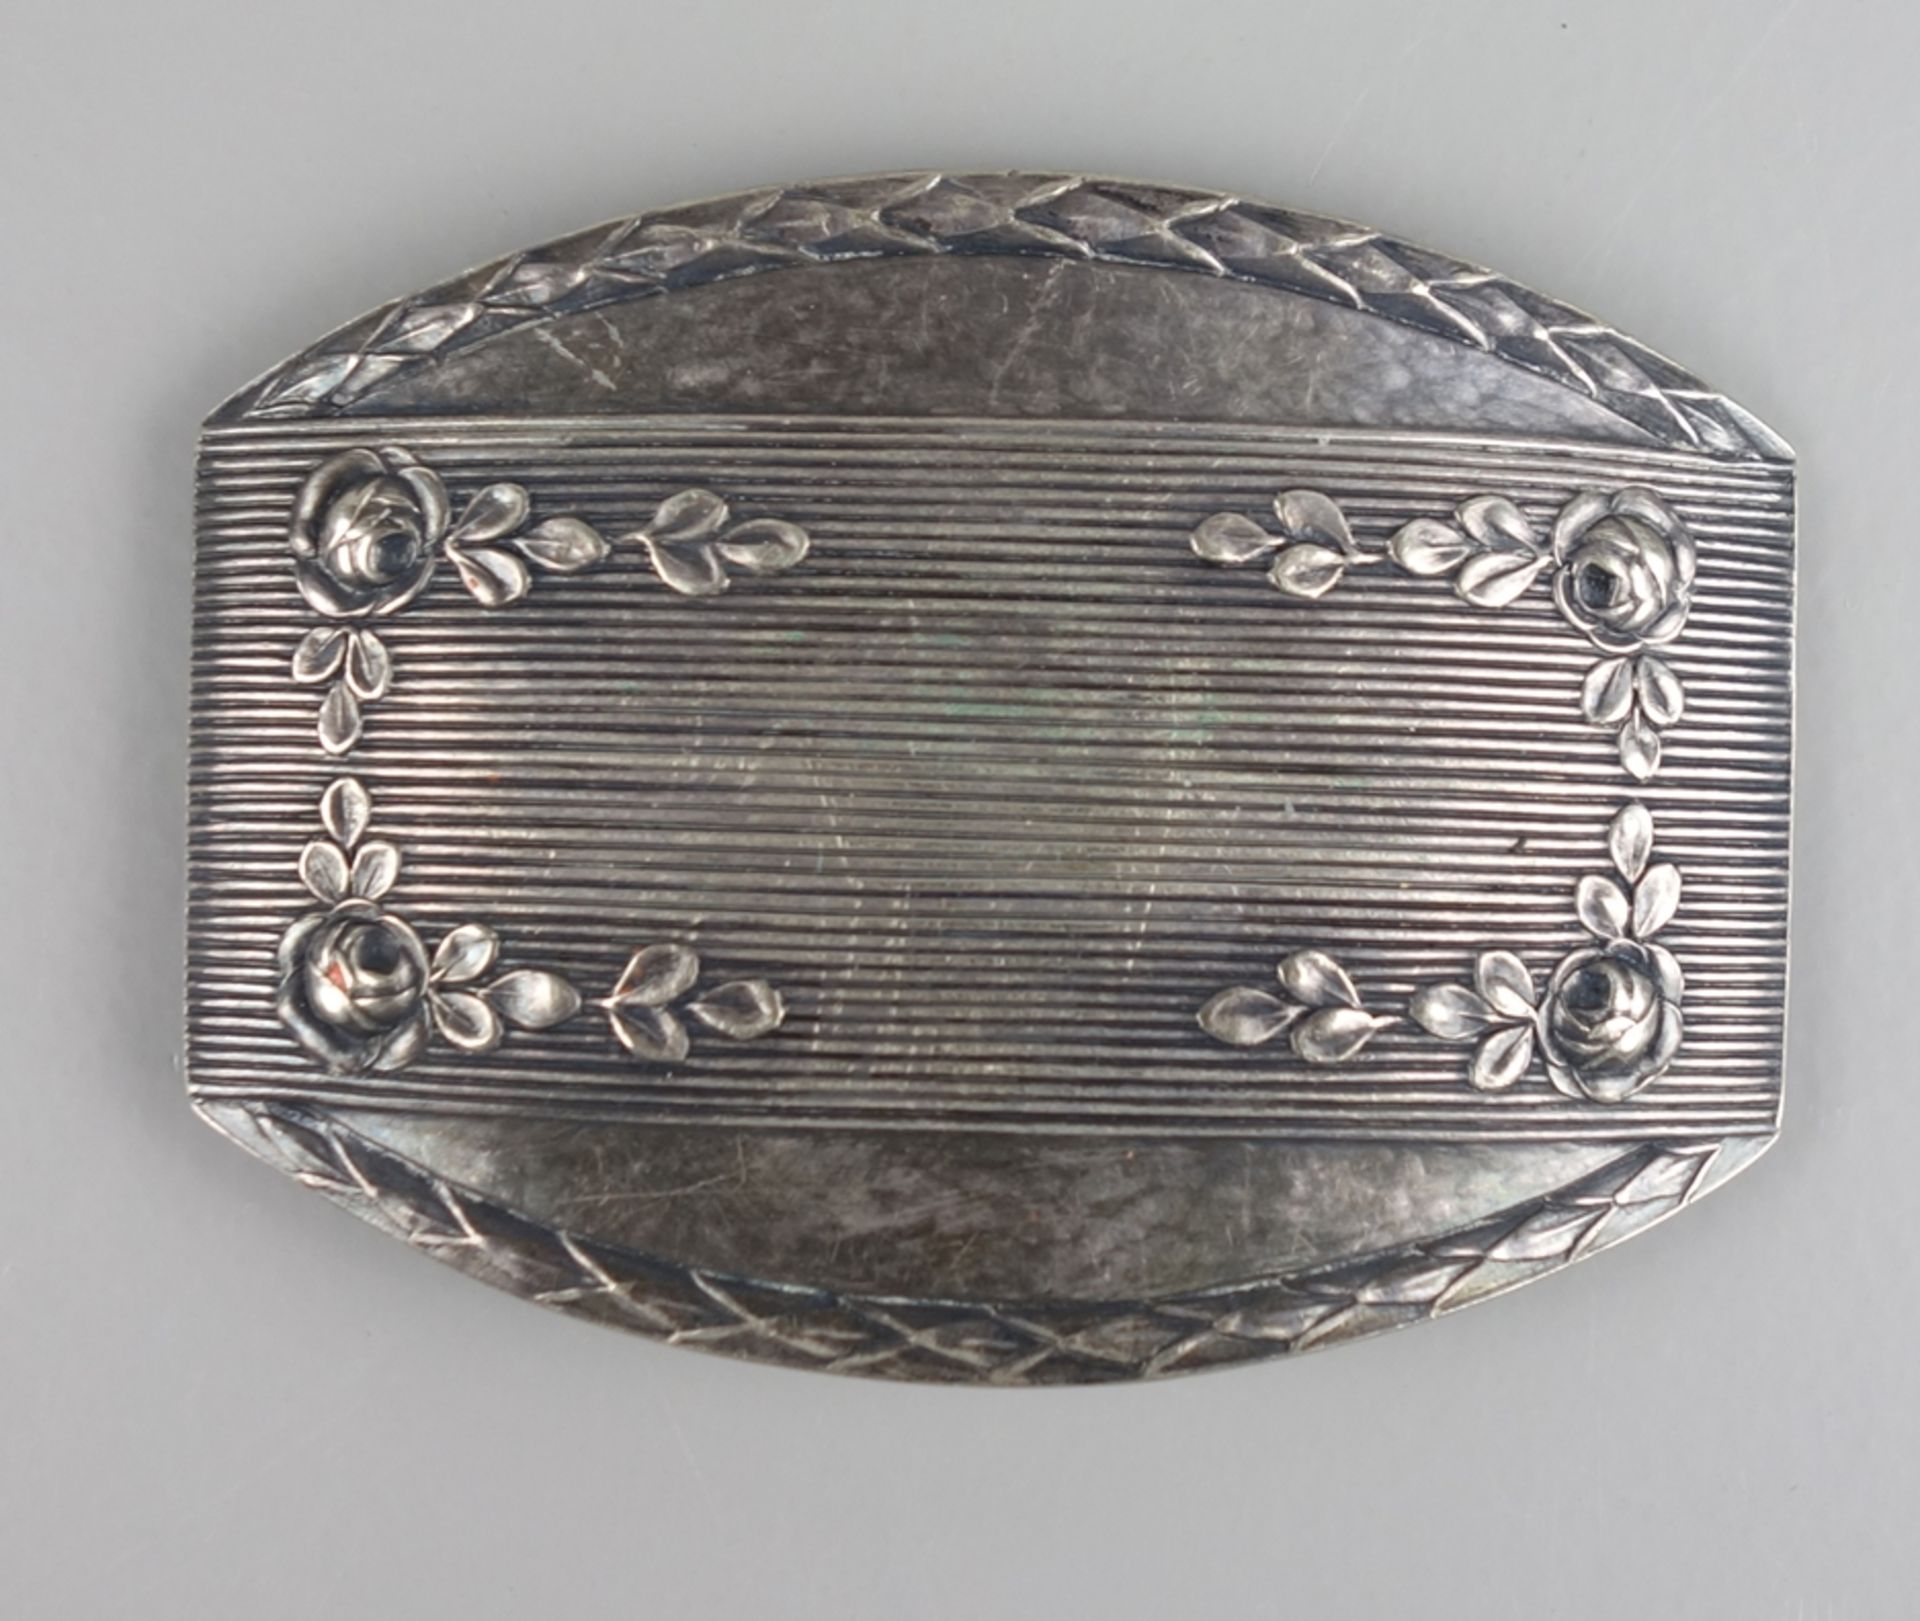 Belt buckle with floral relief, 1920s, alpaca silver